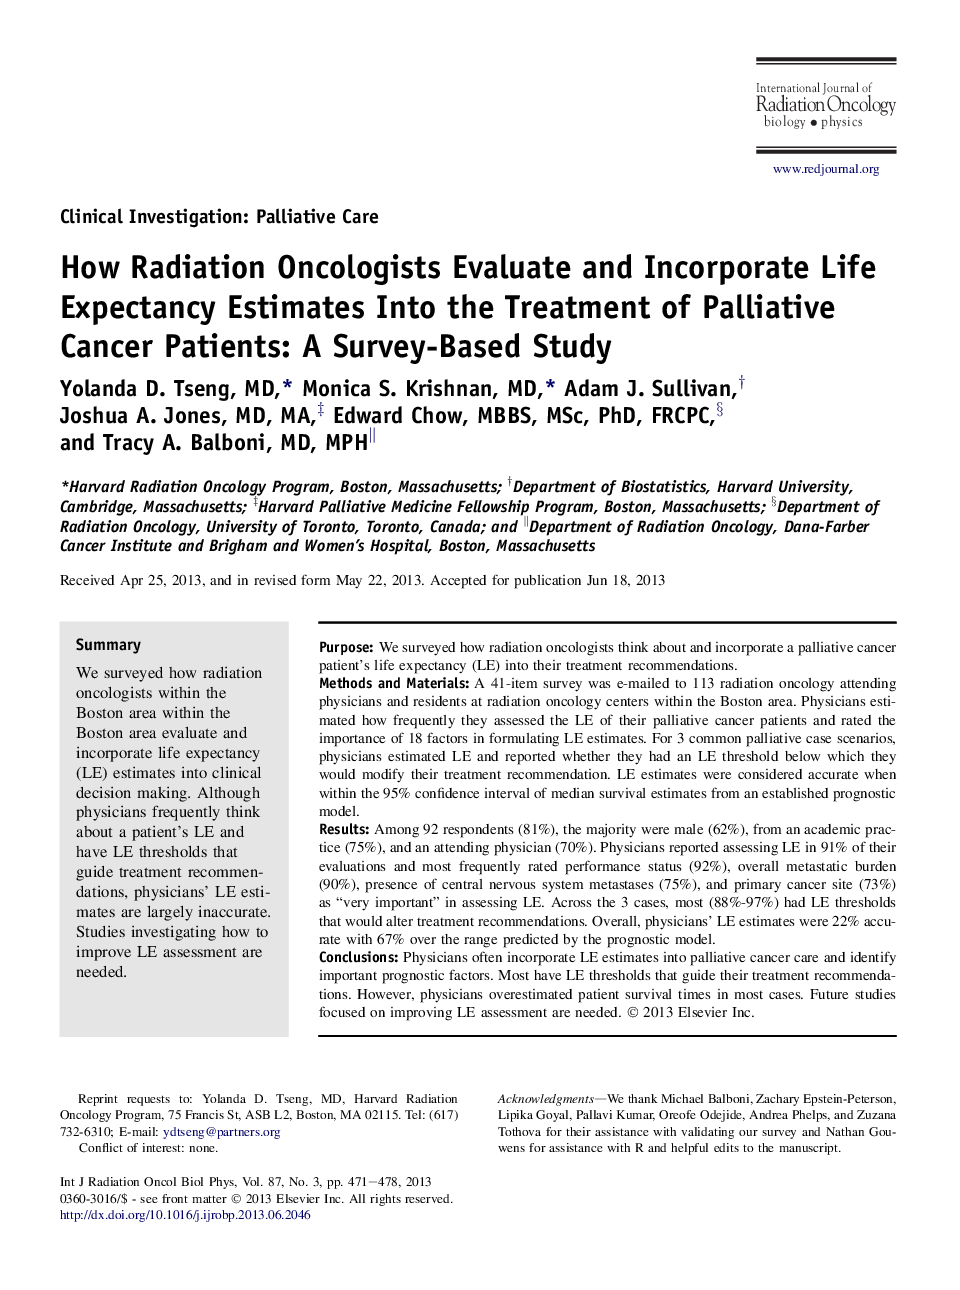 How Radiation Oncologists Evaluate and Incorporate Life Expectancy Estimates Into the Treatment of Palliative Cancer Patients: A Survey-Based Study